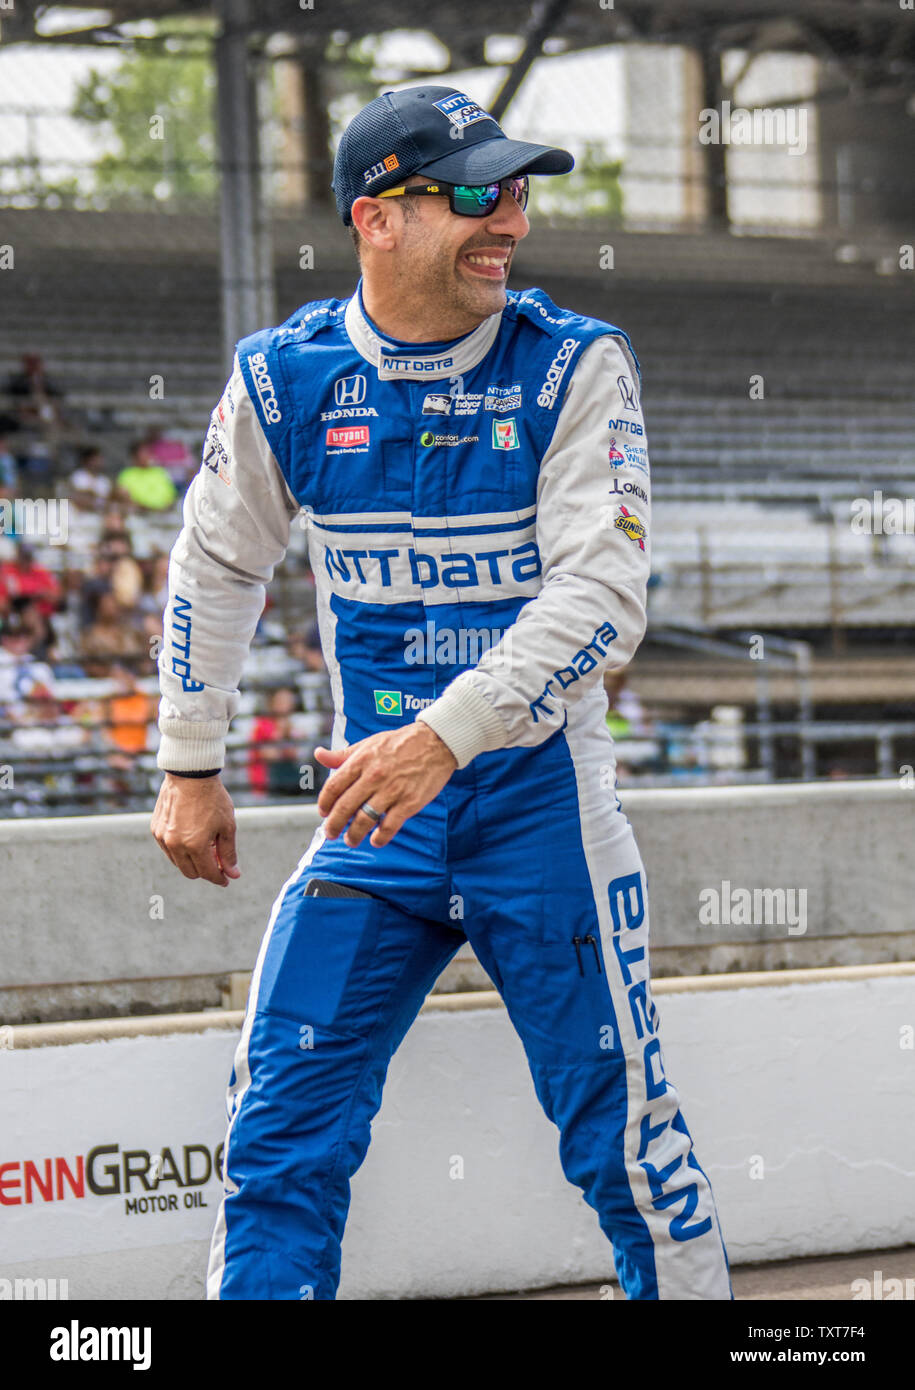 13 Indy 500 Winner Tony Kanaan Strides Down Pit Lane After Posting The Eight Fastest Speed In First Round Qualifying For The 17 Indy 500 At The Indianapolis Motor Speedway On May